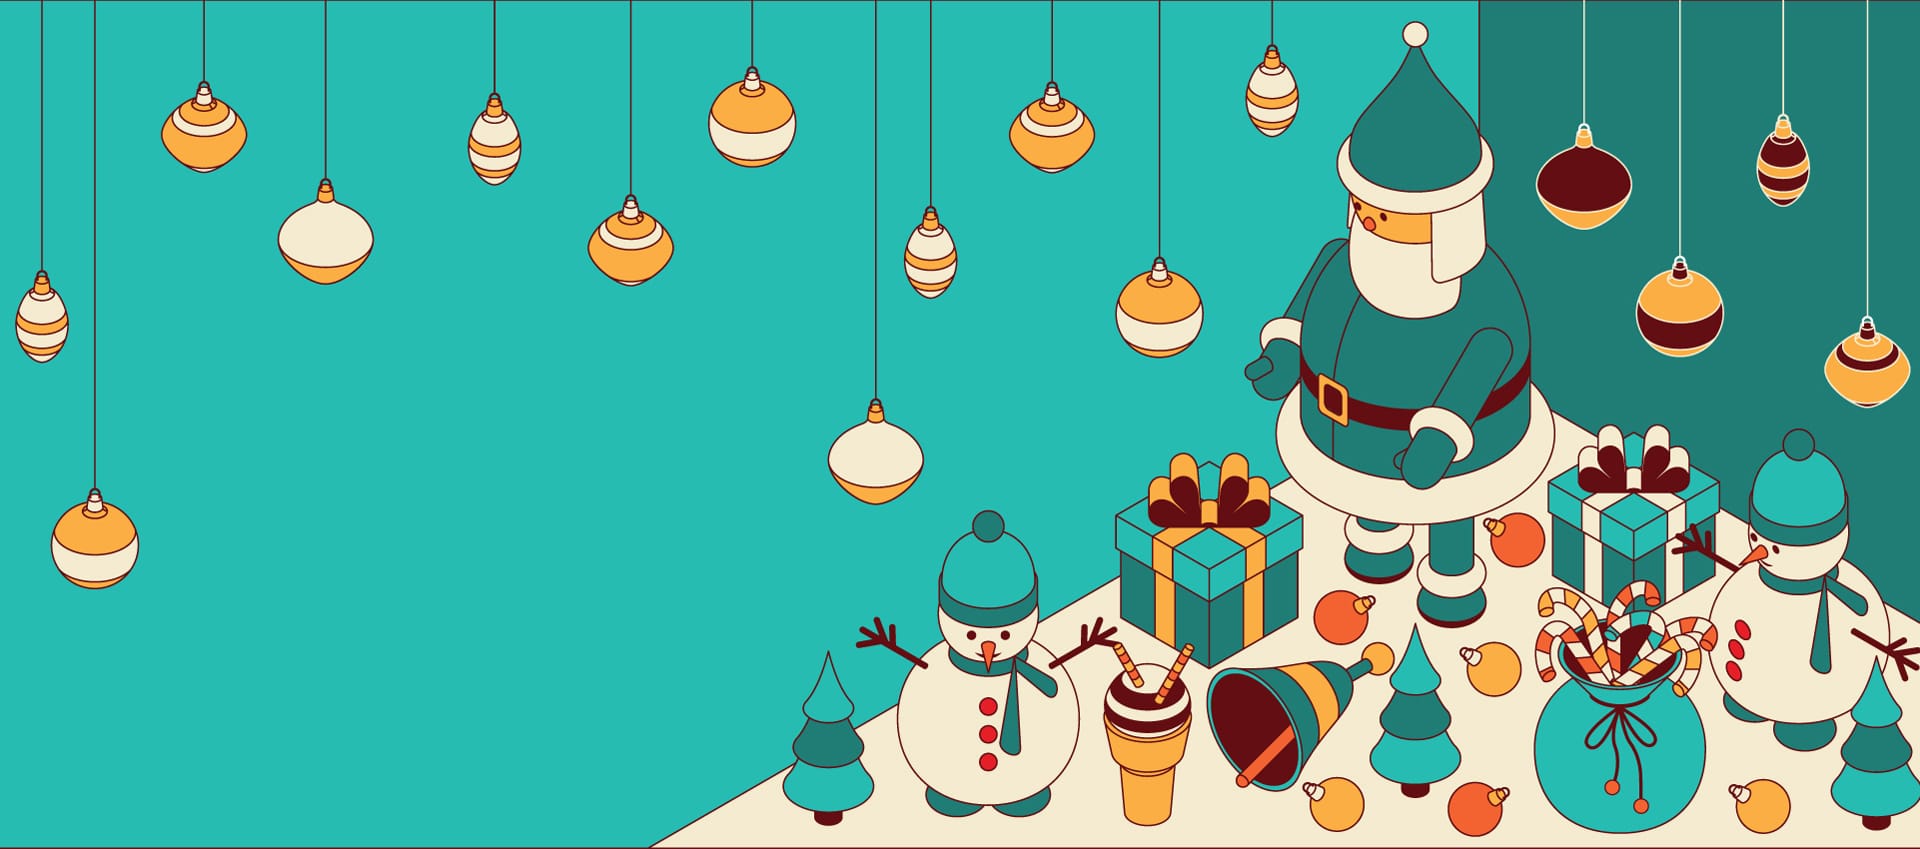 Christmas background with isometric cute toys image